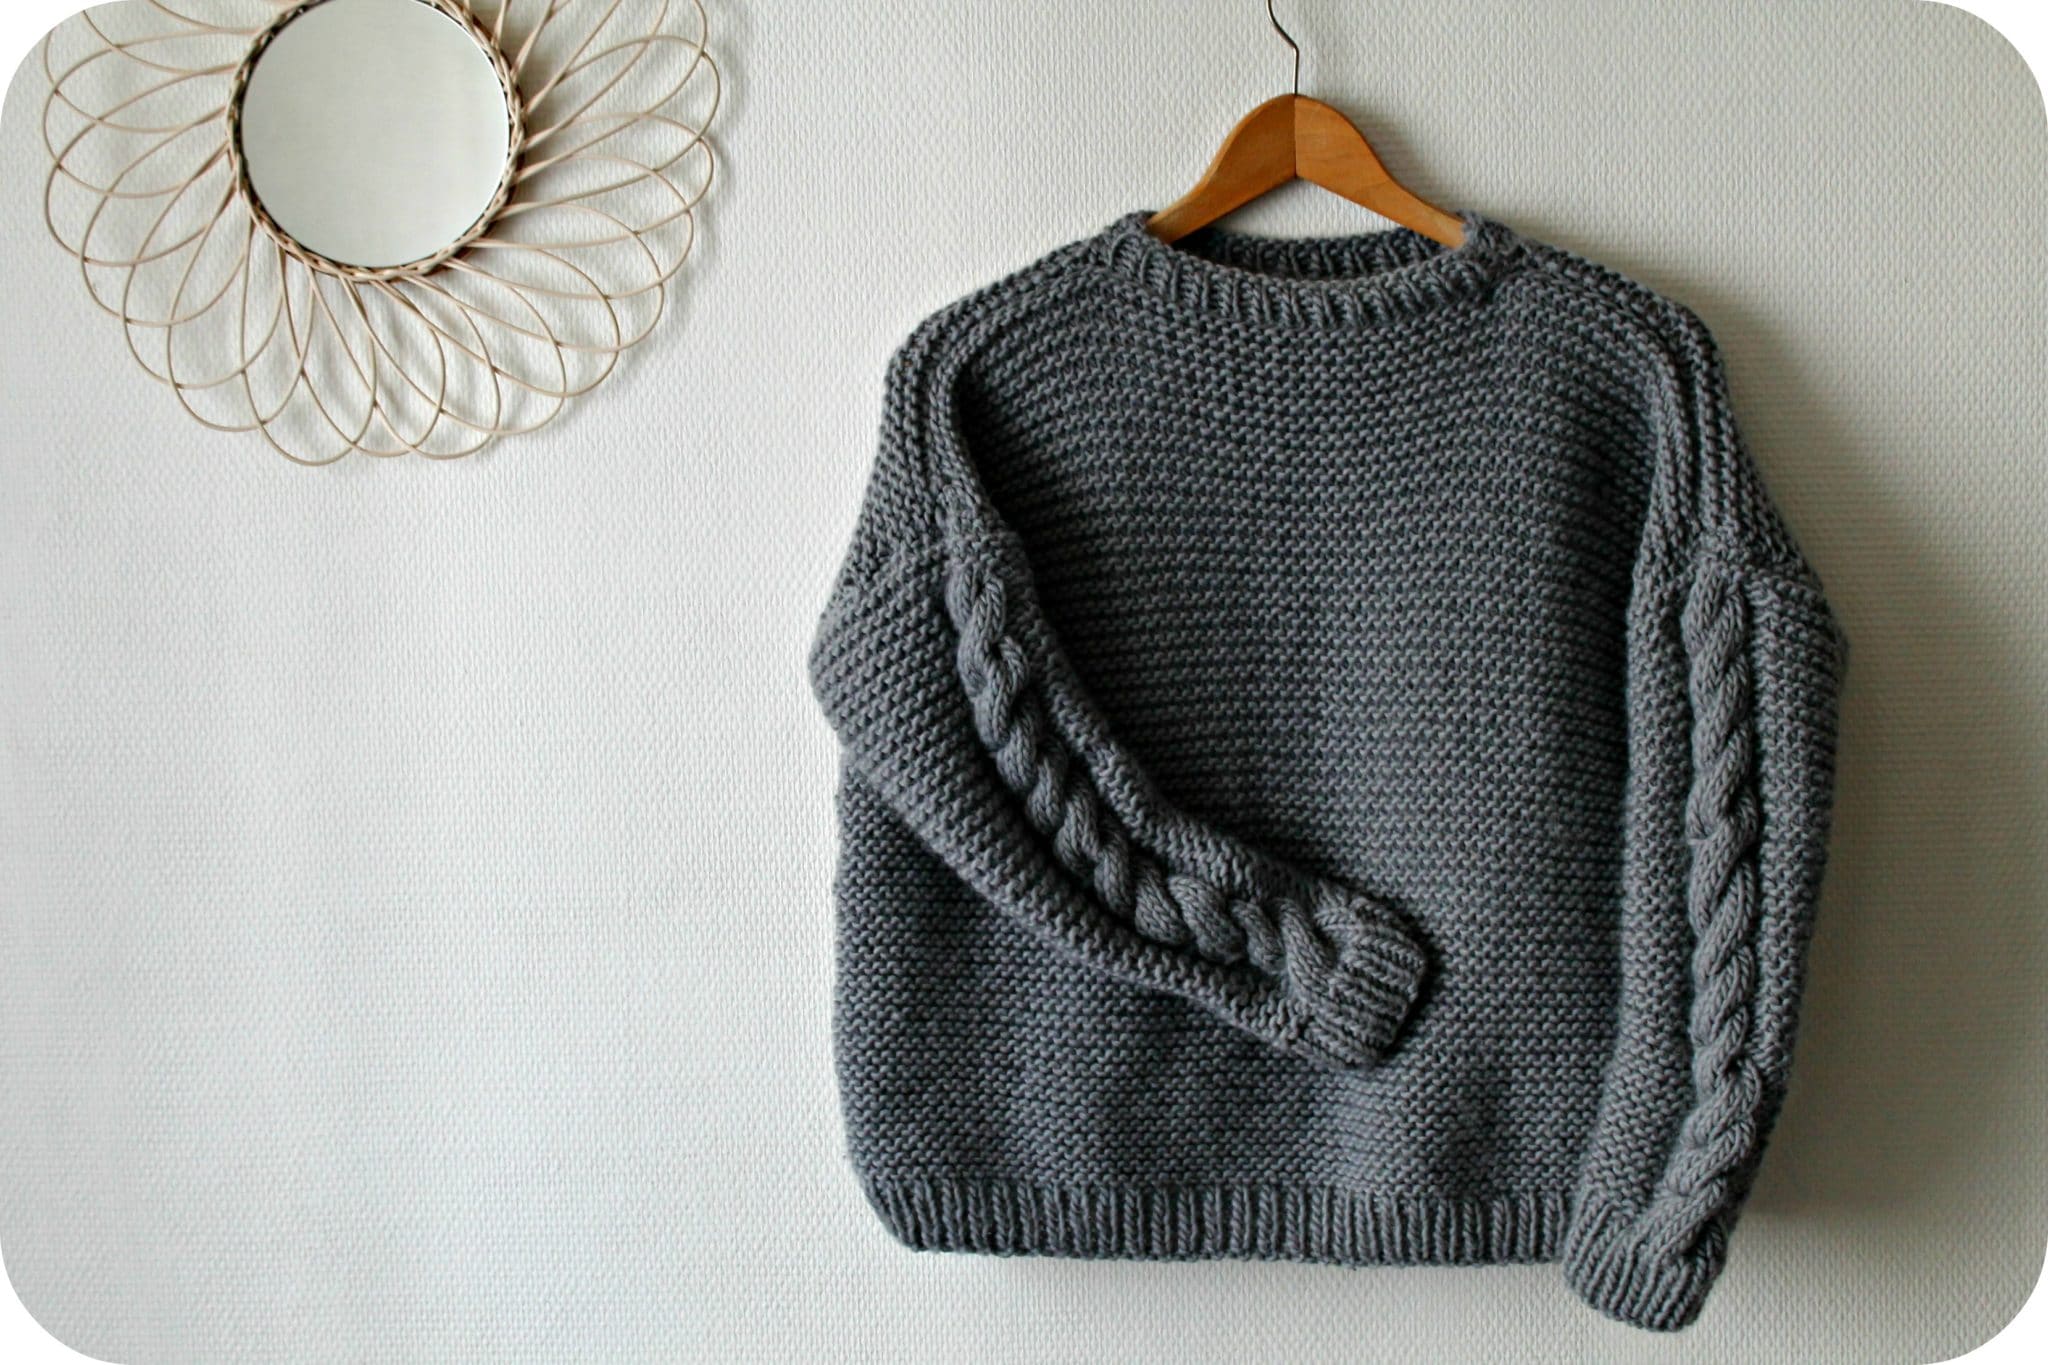 Classic Sweater We Are Knitters - The Funky Fresh Project